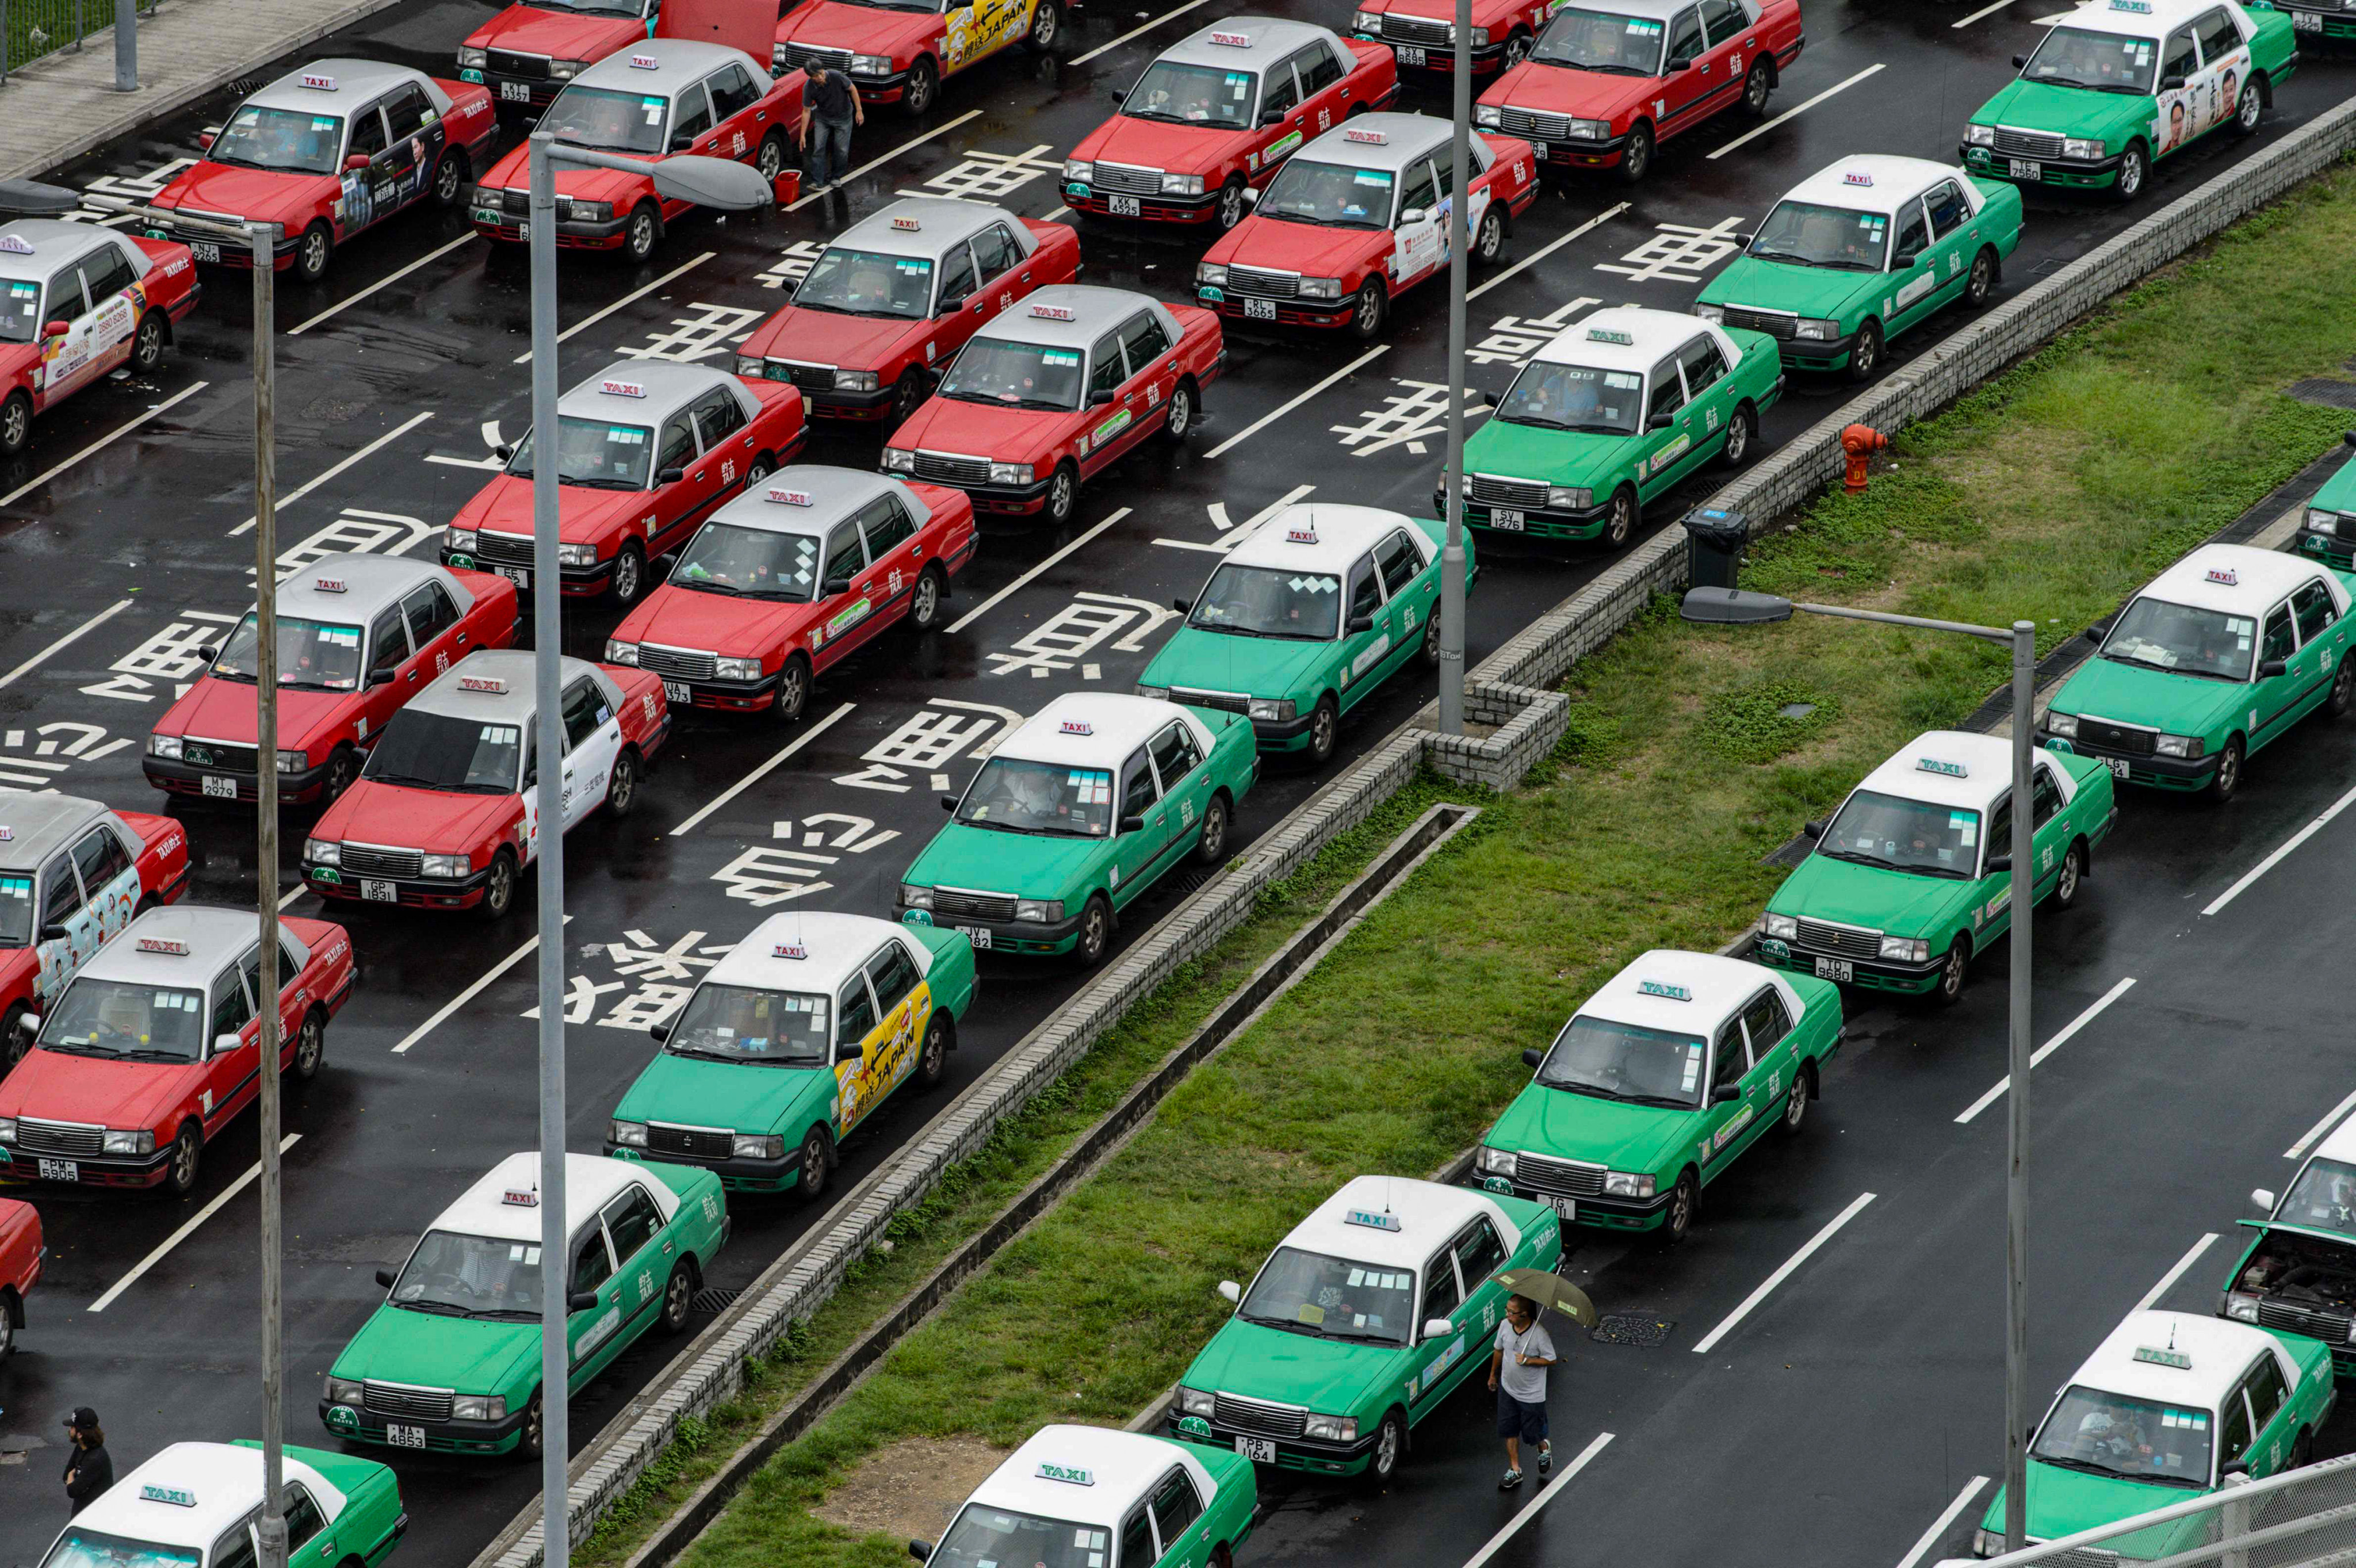 Red and green taxis line up in ranks. Photo: AFP